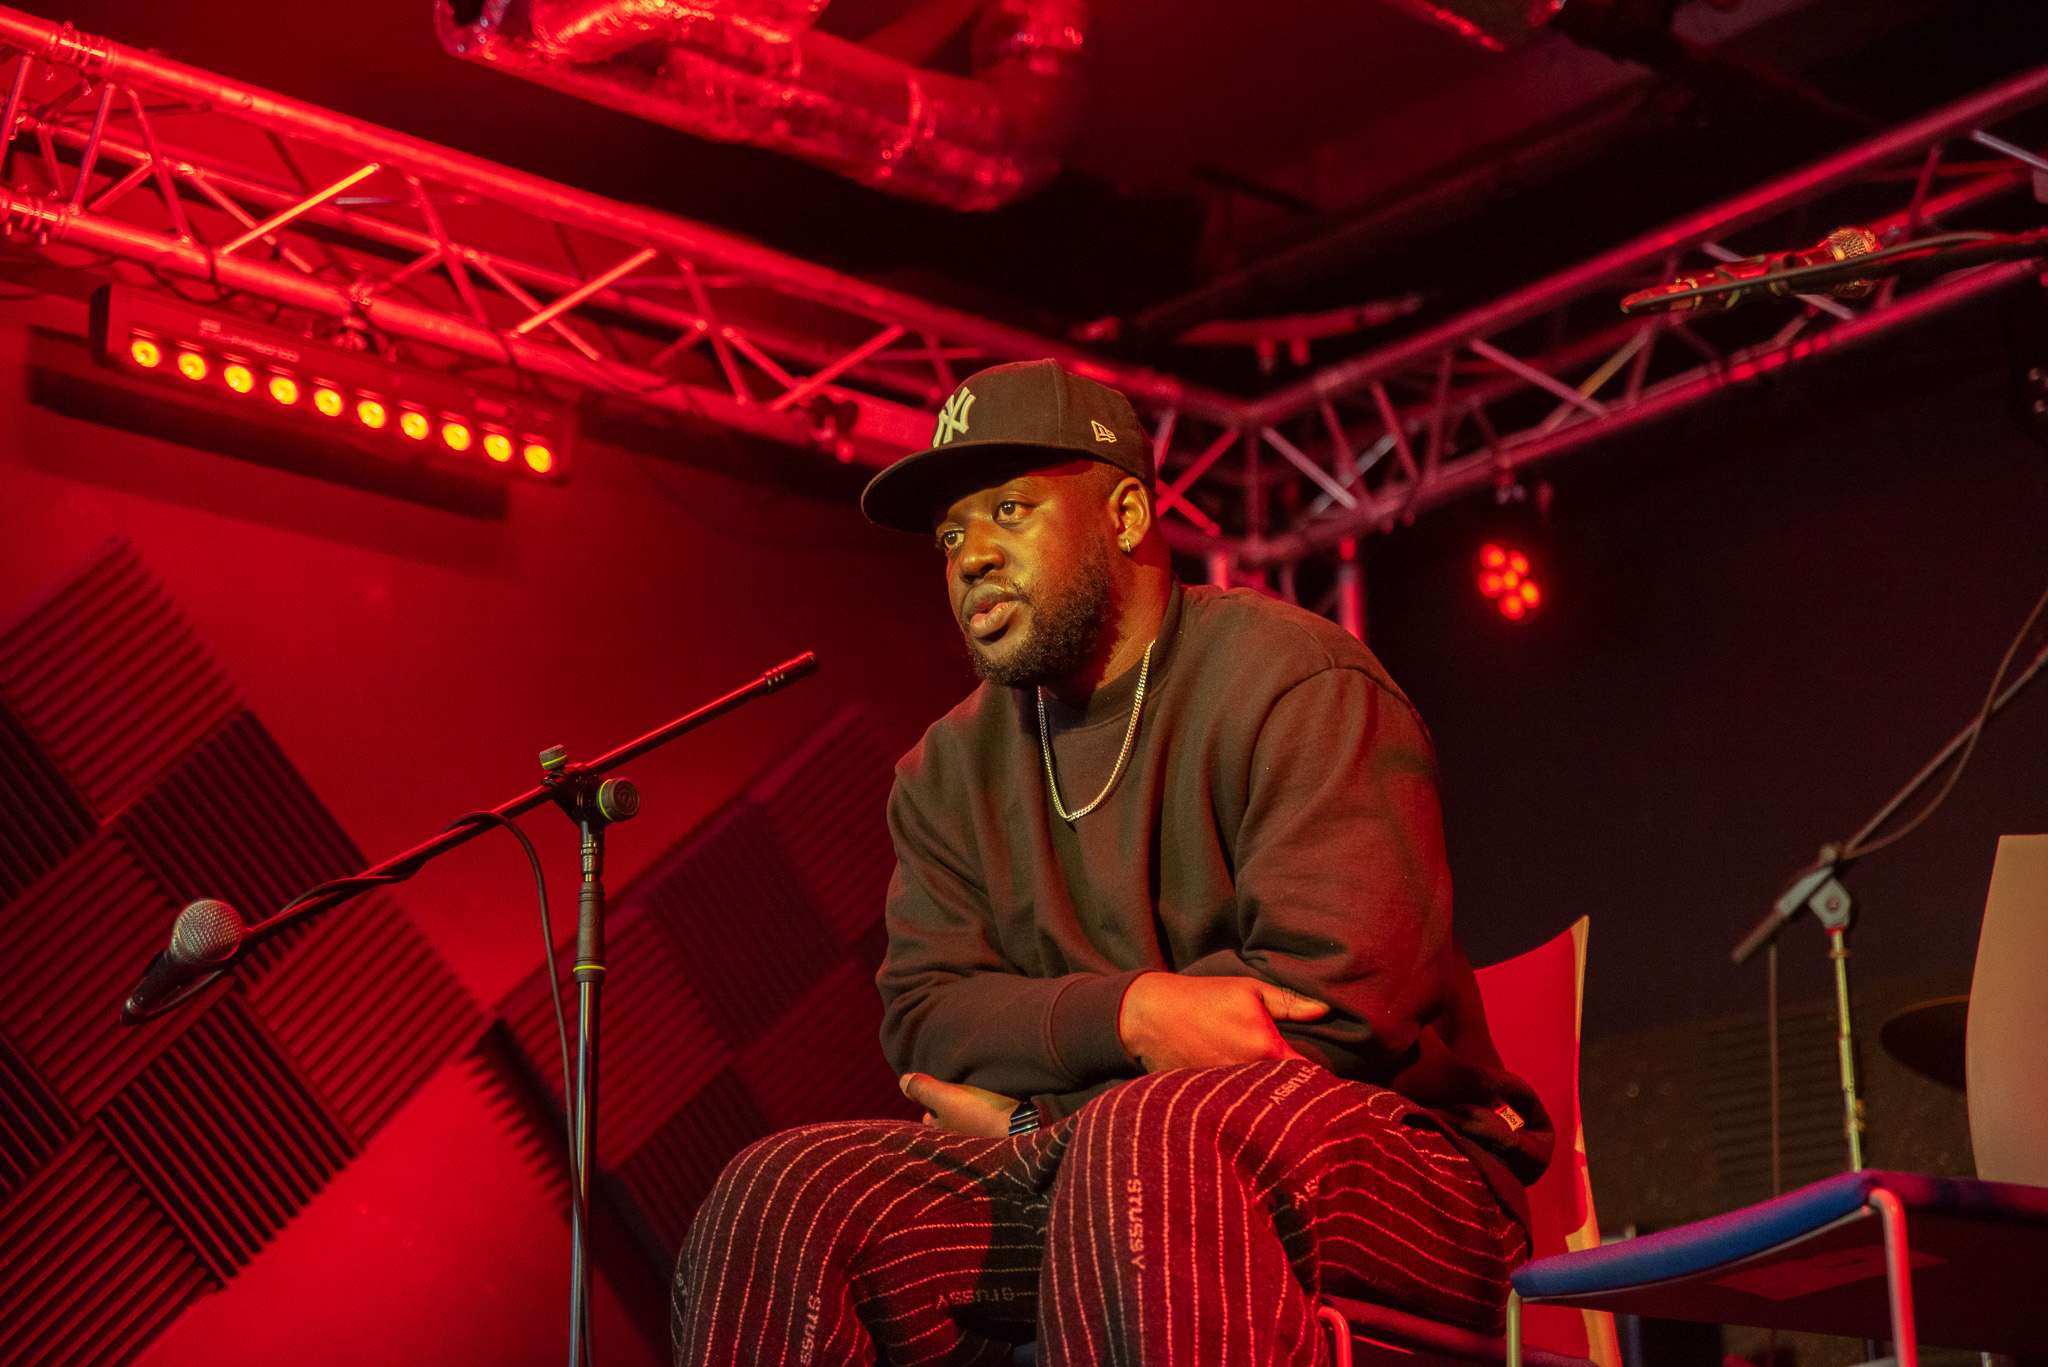 Access Creative College Manchester Hosts Inspiring Session with Femi Koleoso of Ezra Collective